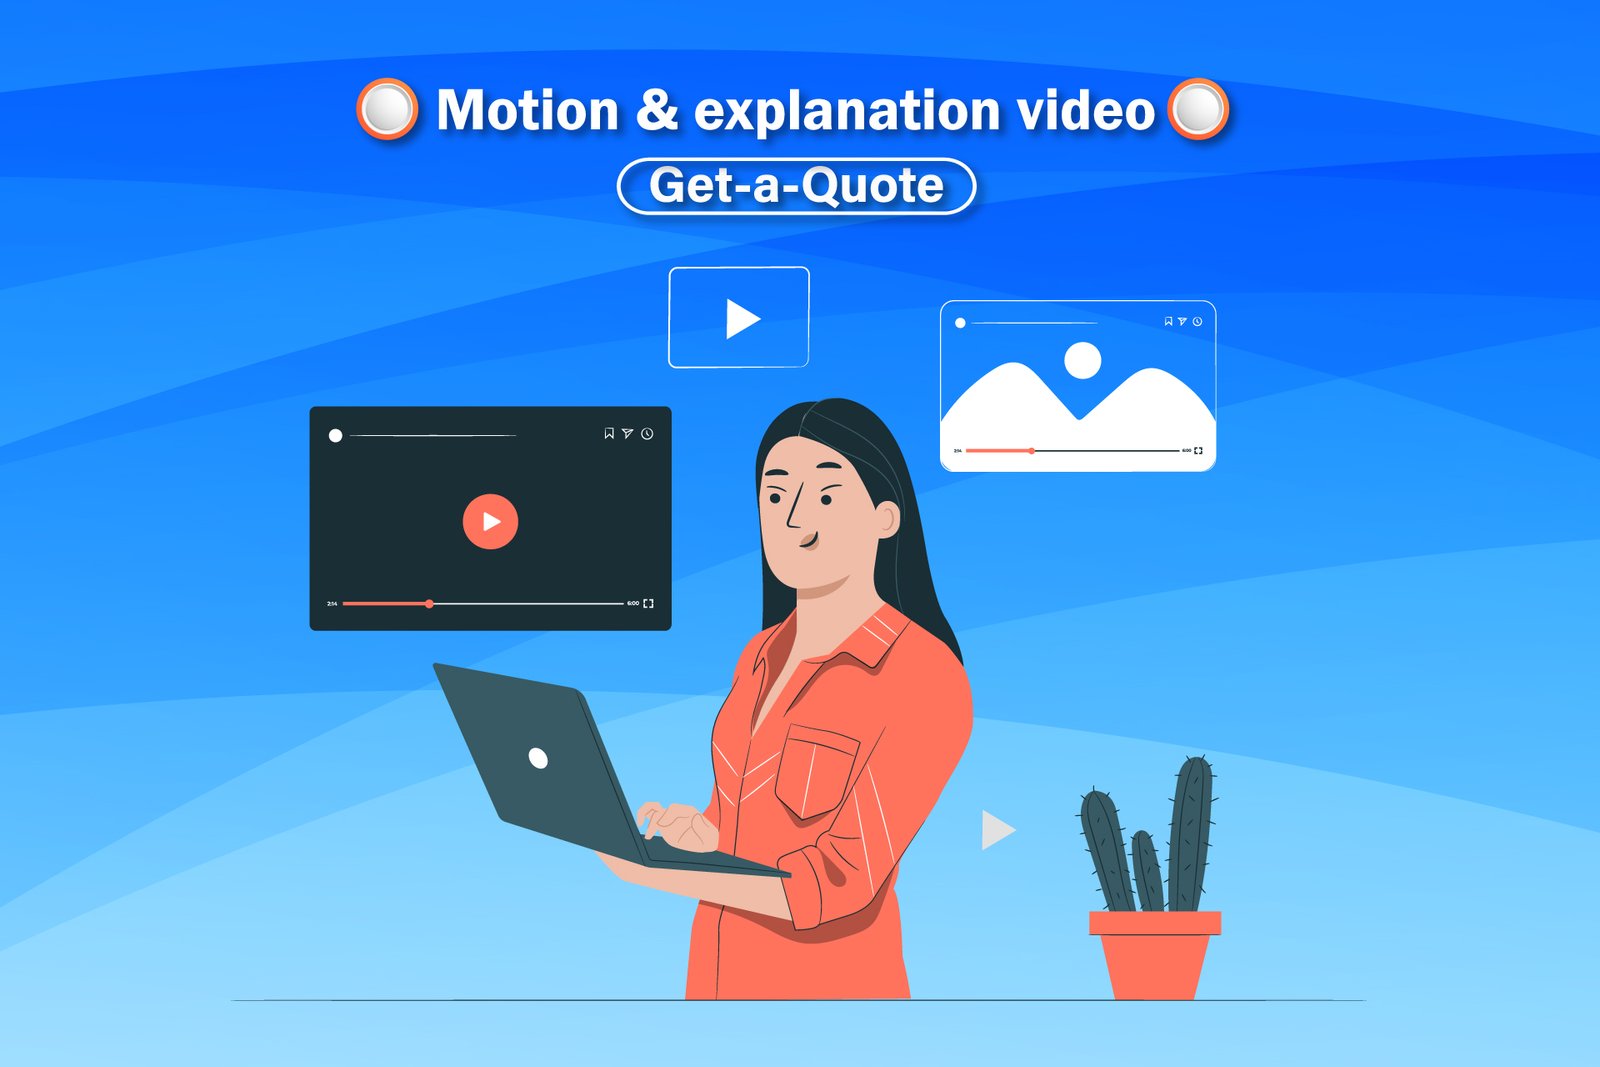 Motion & explanation video